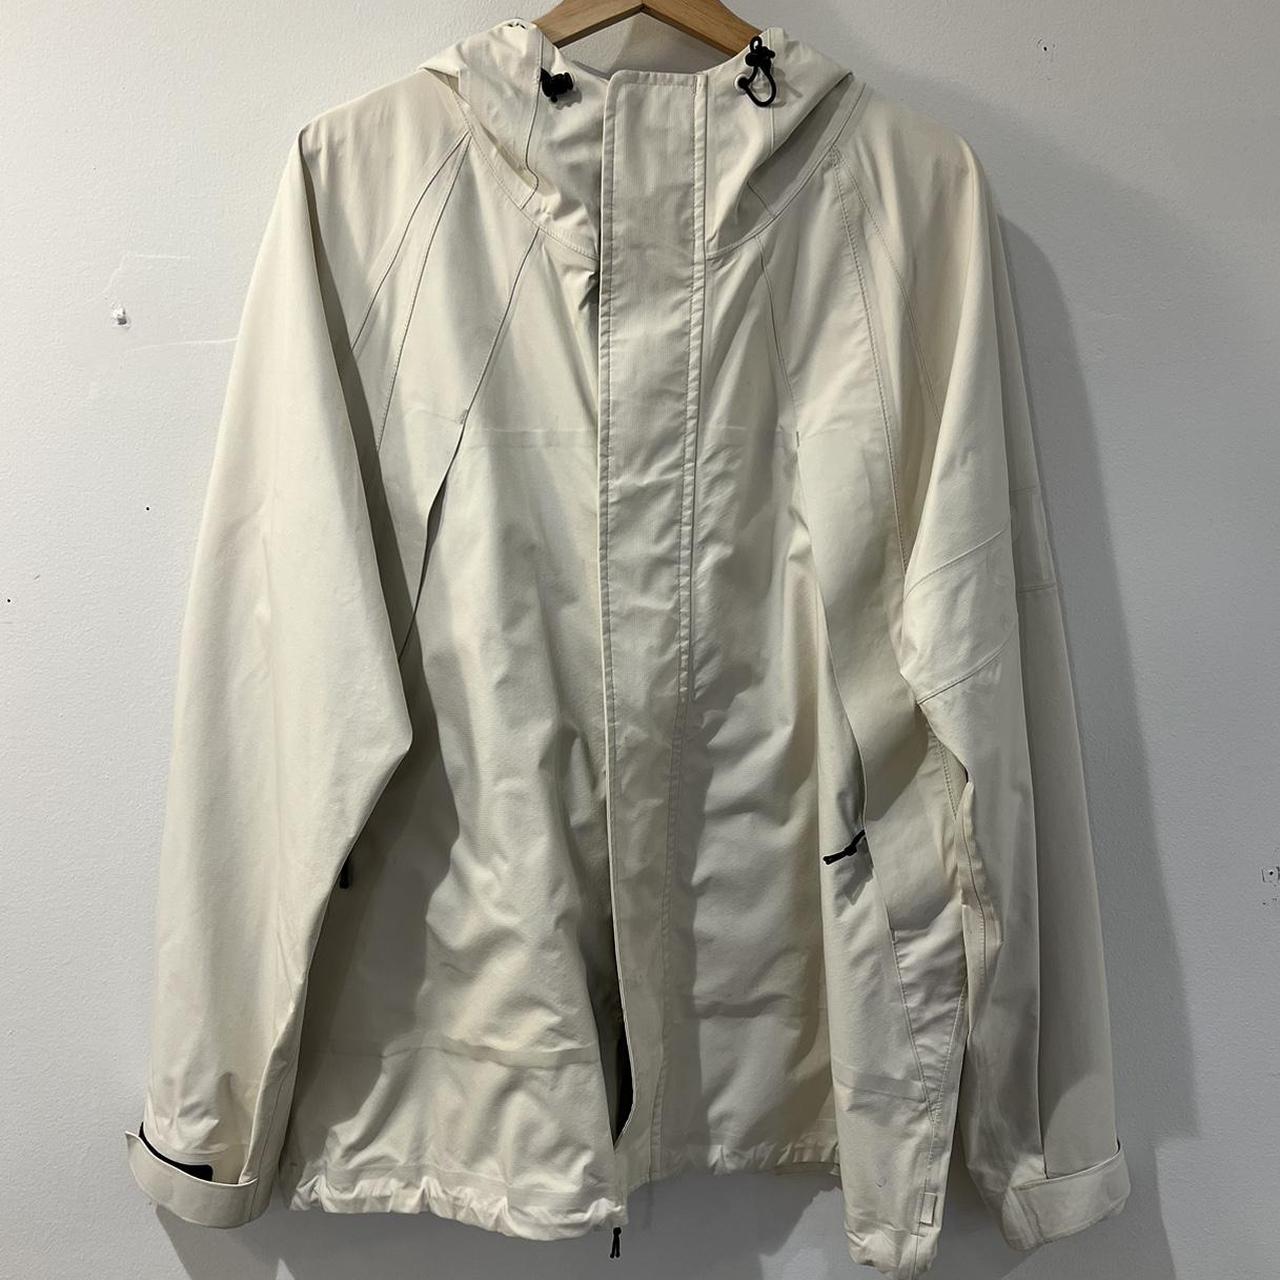 Supreme - Authenticated Jacket - Cotton Beige for Men, Very Good Condition